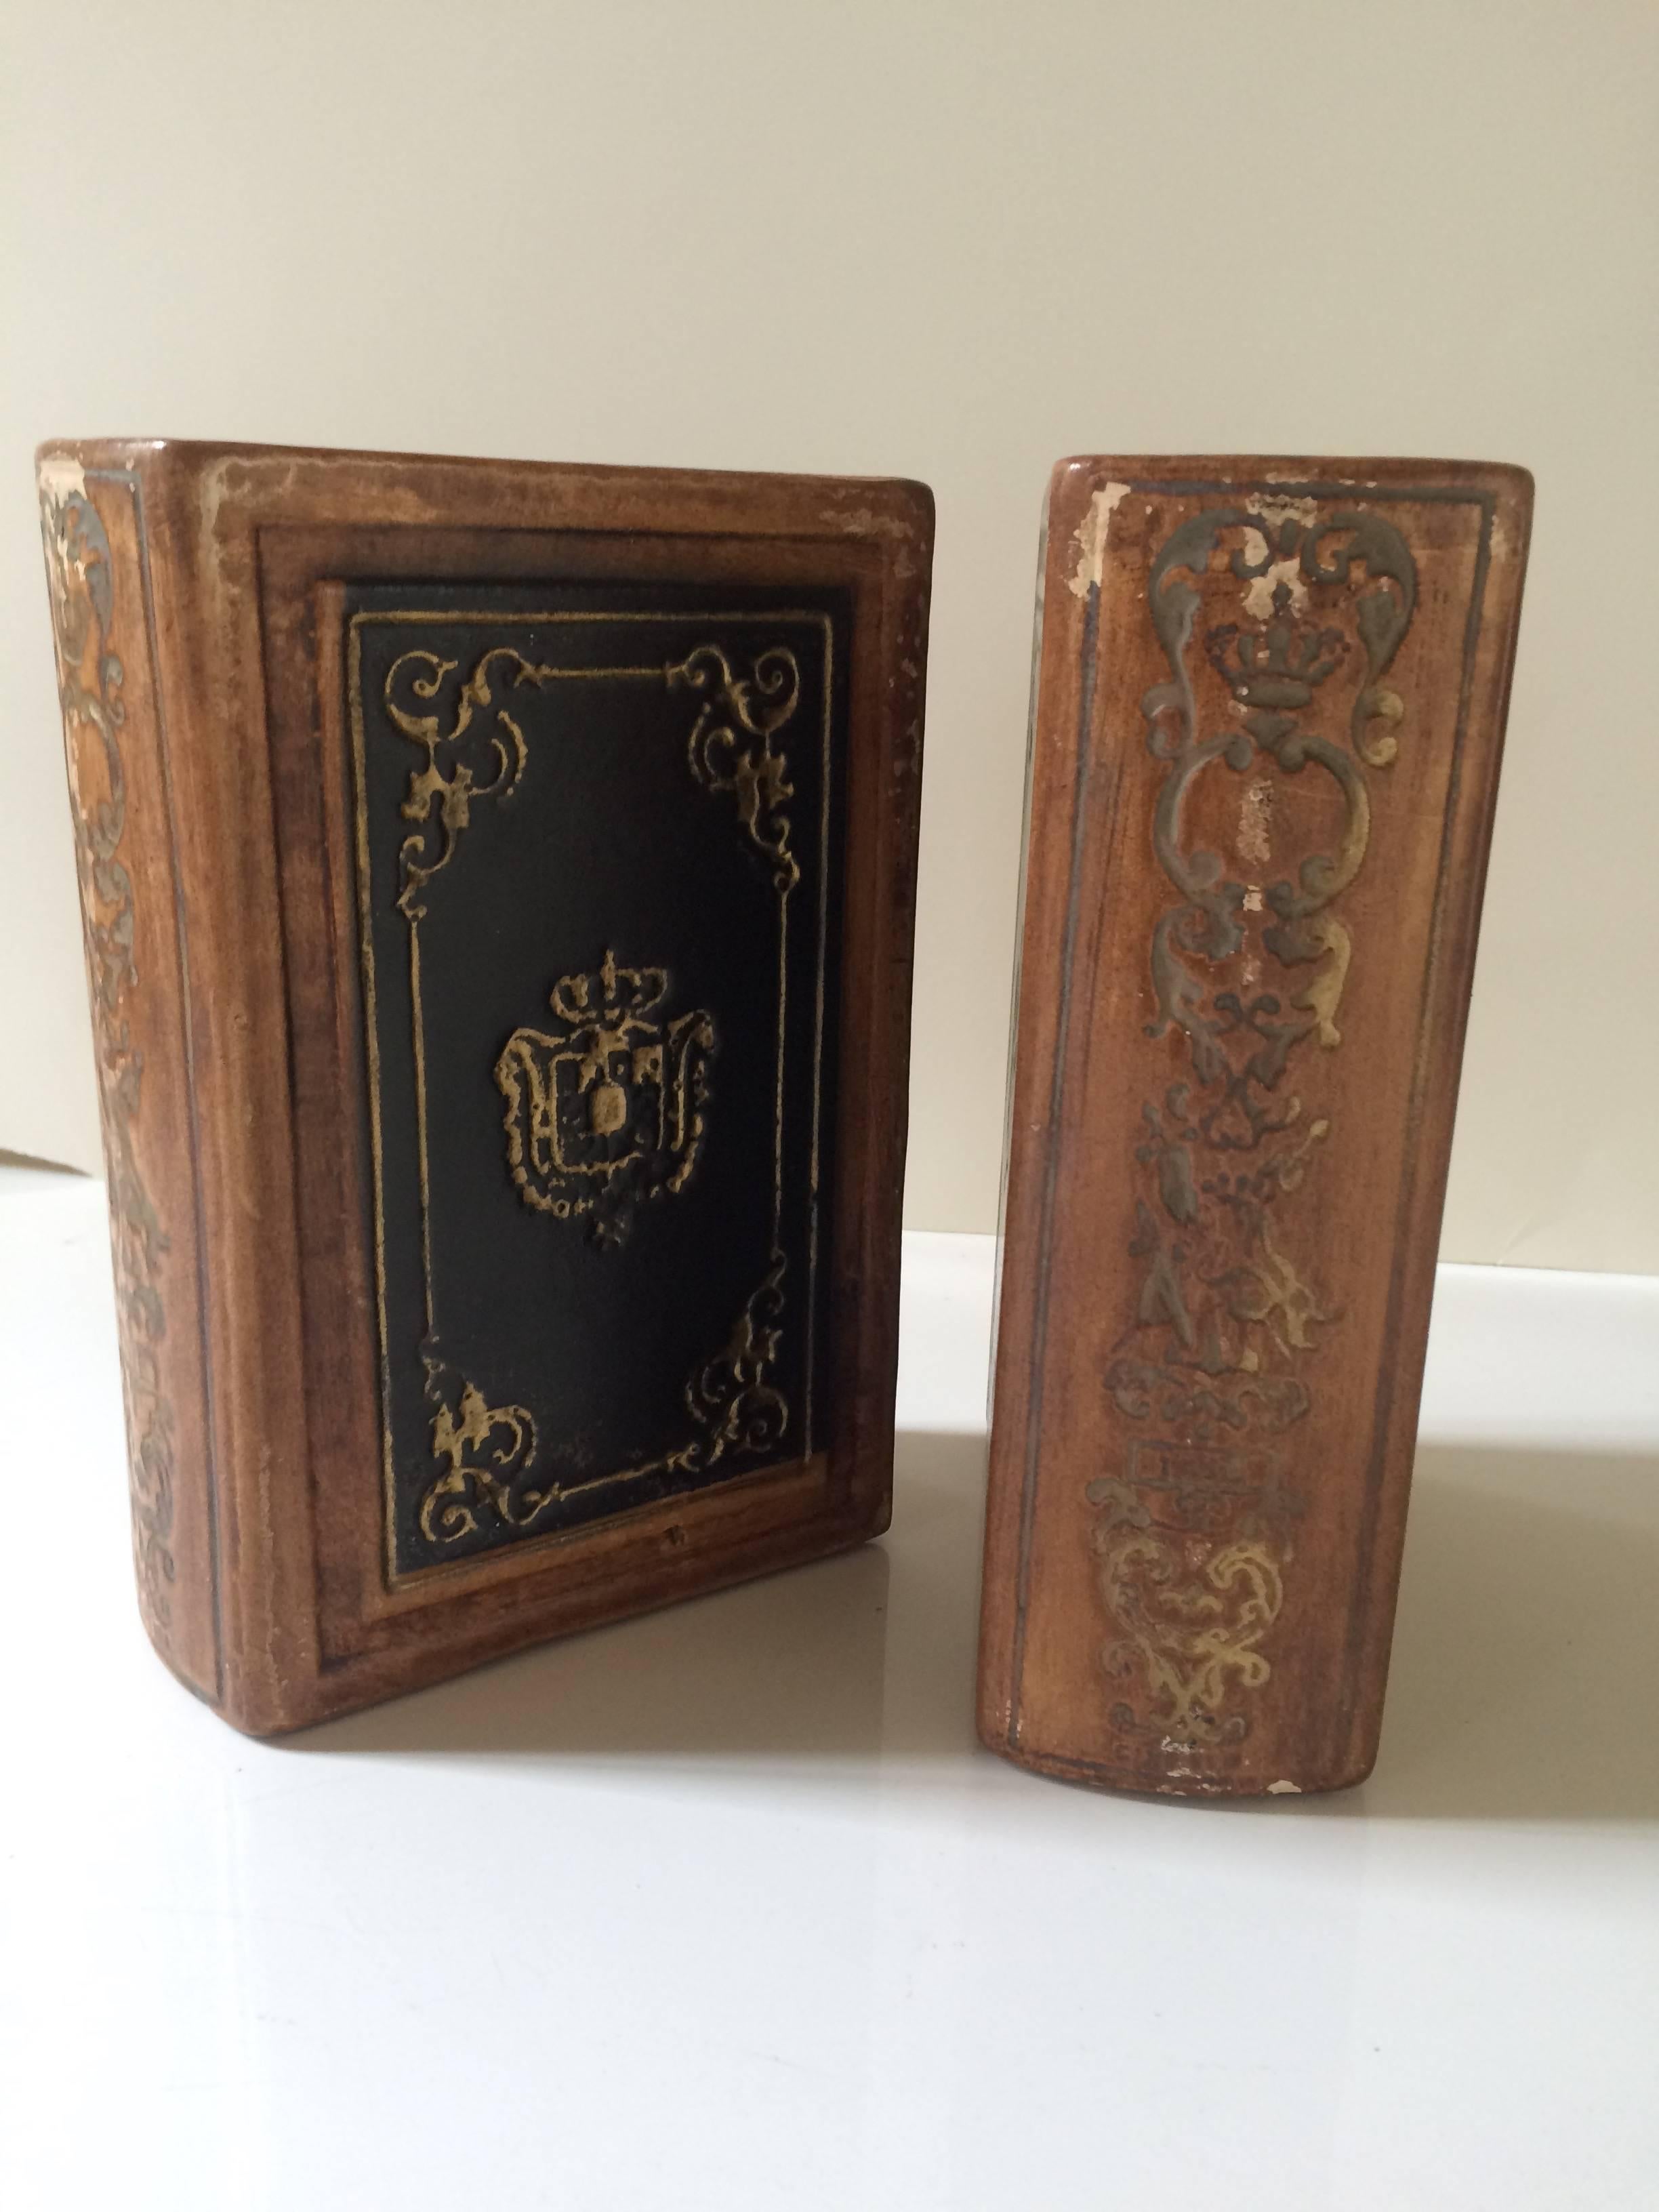 Quite a cleaver pair of bookends, while having the look of real leather bound books, the pair are actually bookends! Very heavy and substantial this pair make a great addition to your book cases throughout the house and in the kids room.

Due to